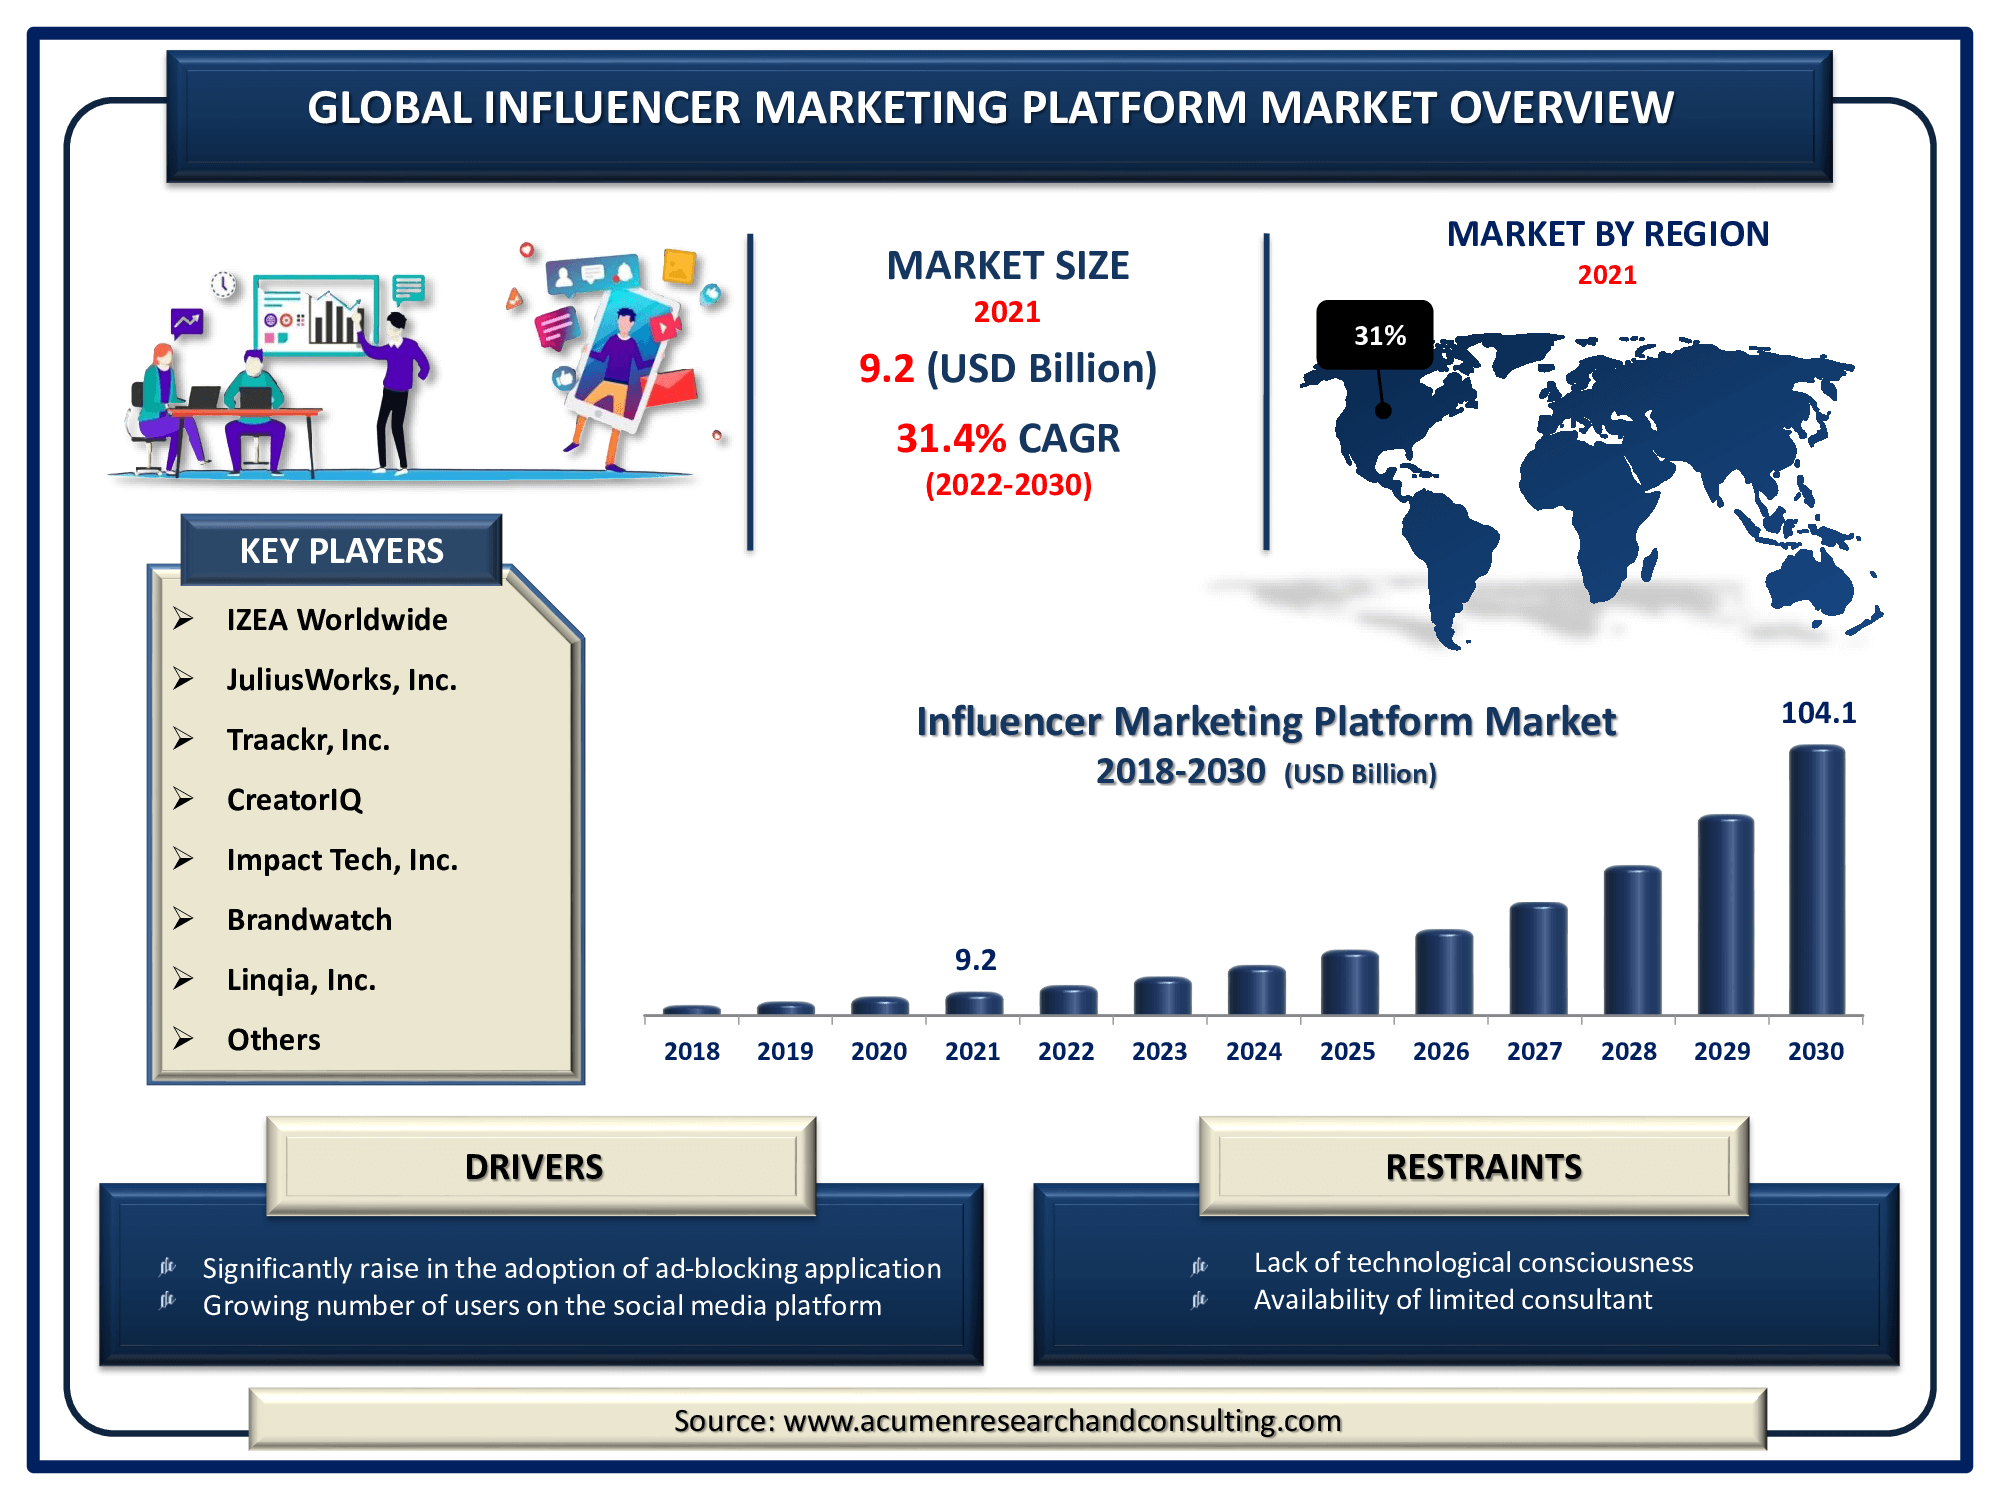 The Global Influencer Marketing Platform Market Size accounted for USD 9.2 Billion in 2021 and is predicted to be worth USD 104.1 Billion by 2030, with a CAGR of 31.4% during the forthcoming period from 2022 to 2030.